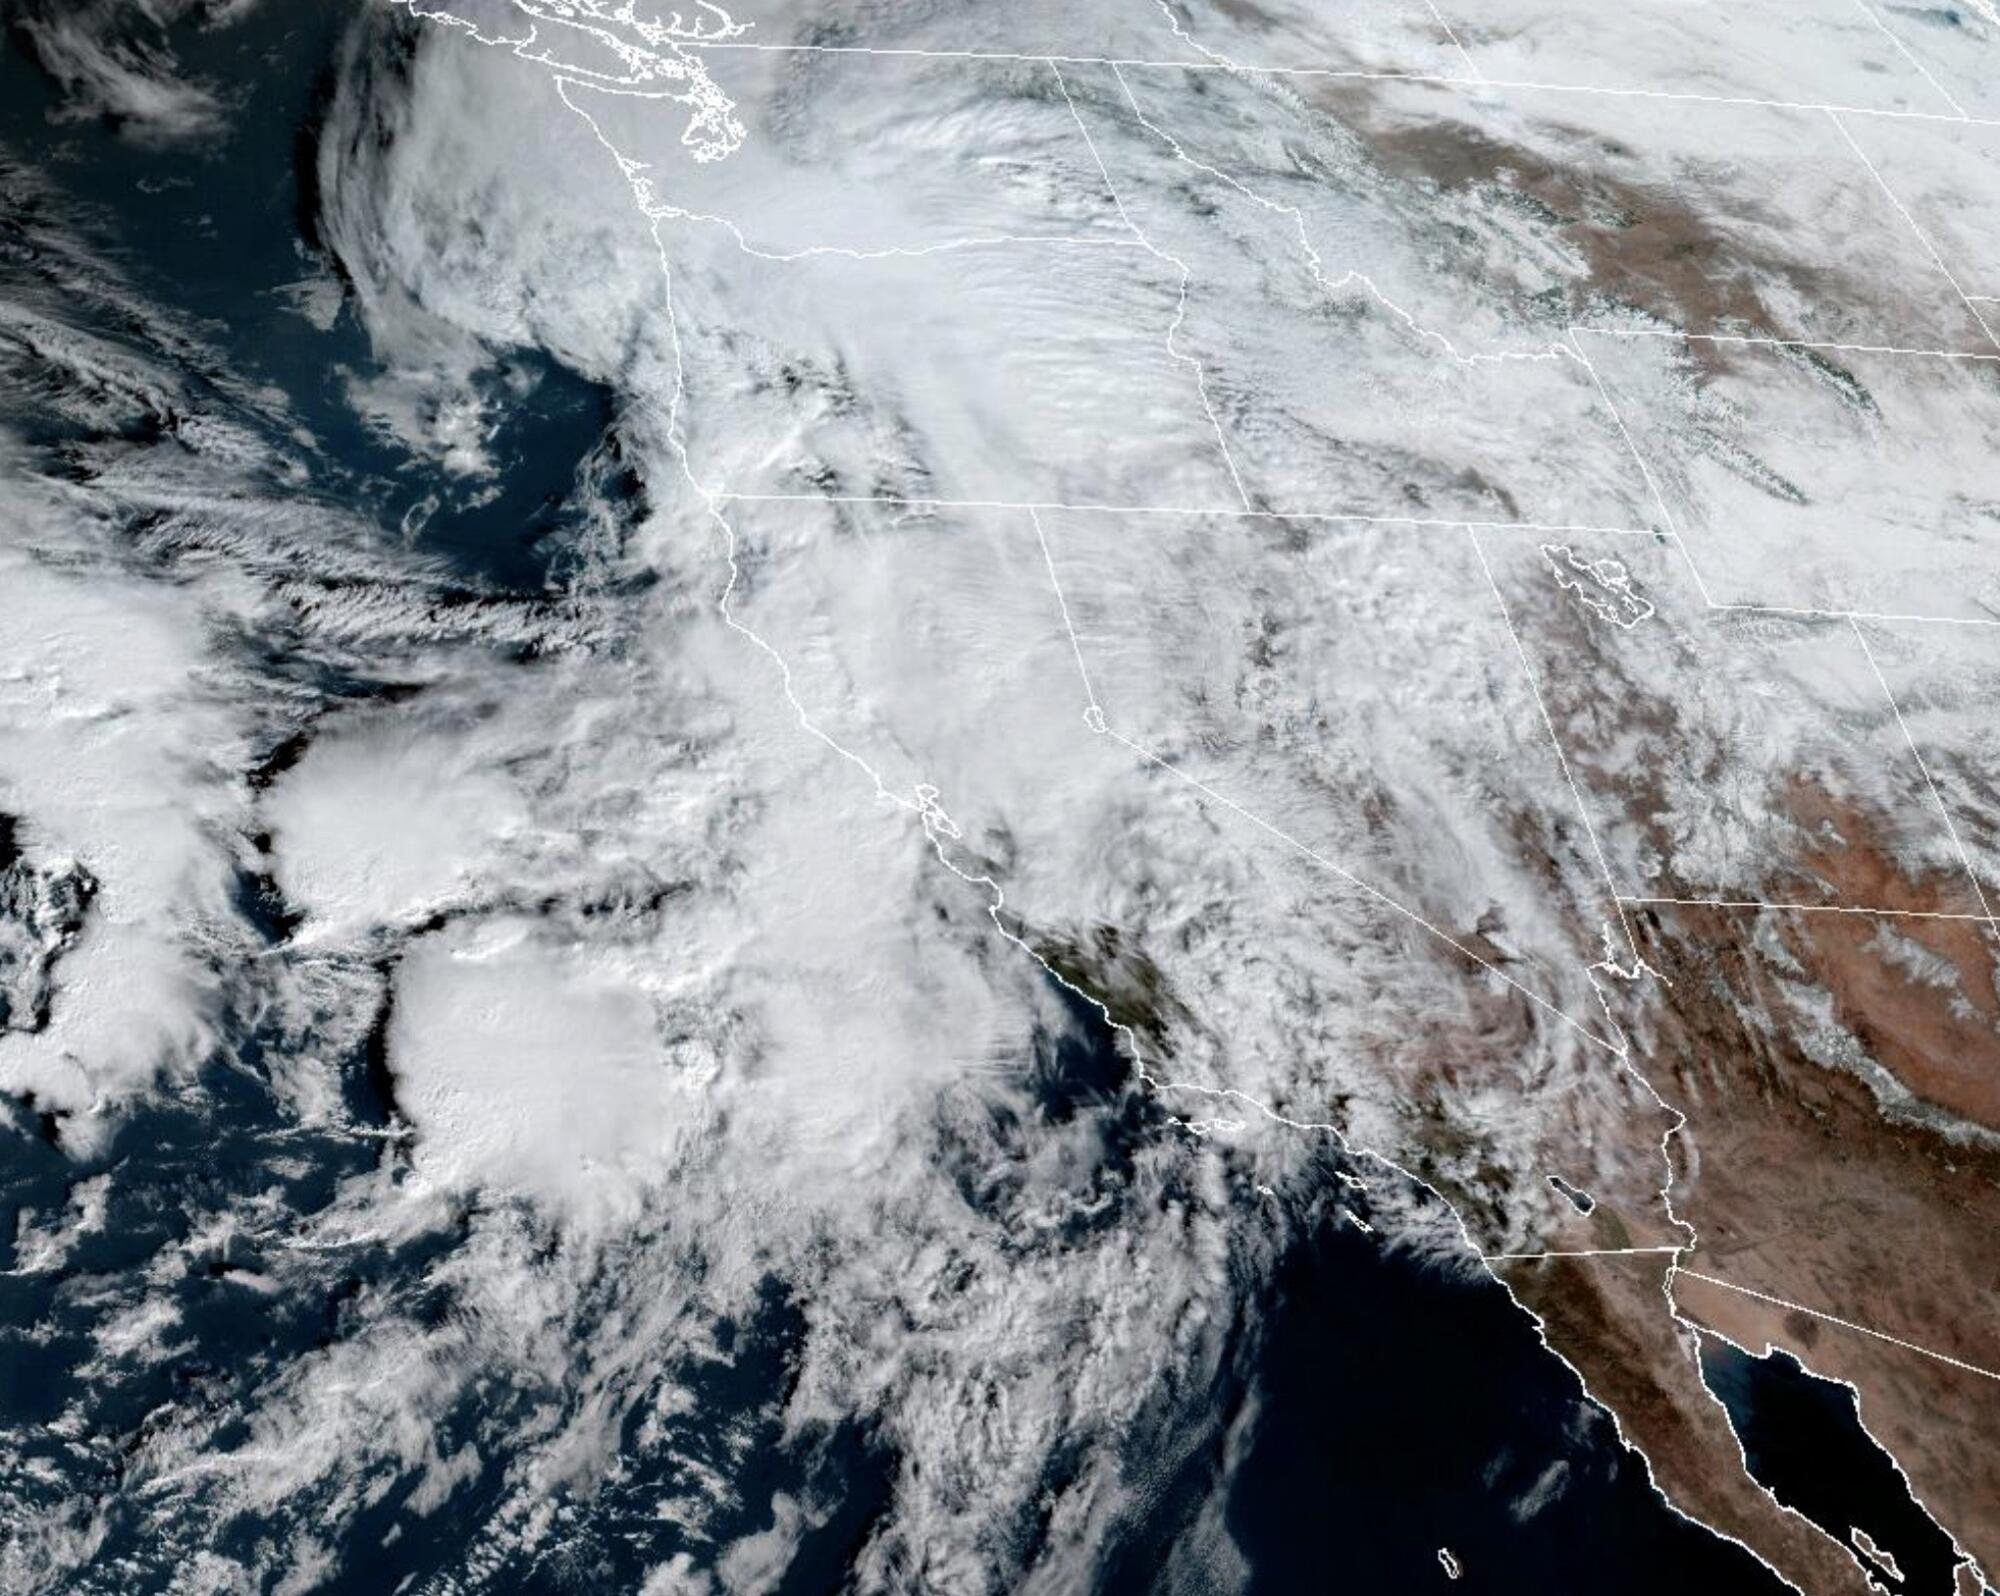 Satellite imagery of a storm over California.